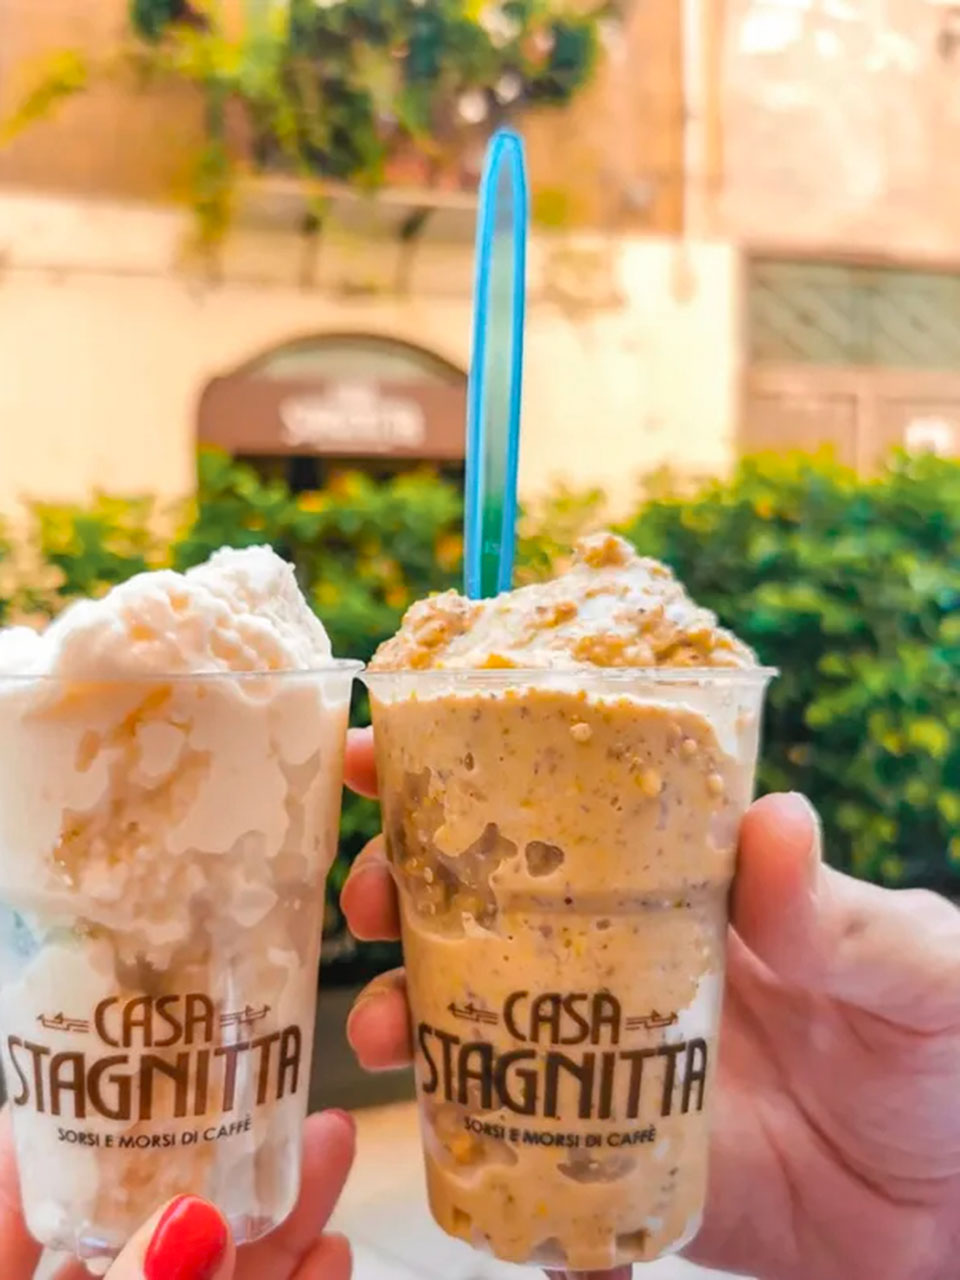 granita from Casa Stagnitta, an ancient place in Palermo